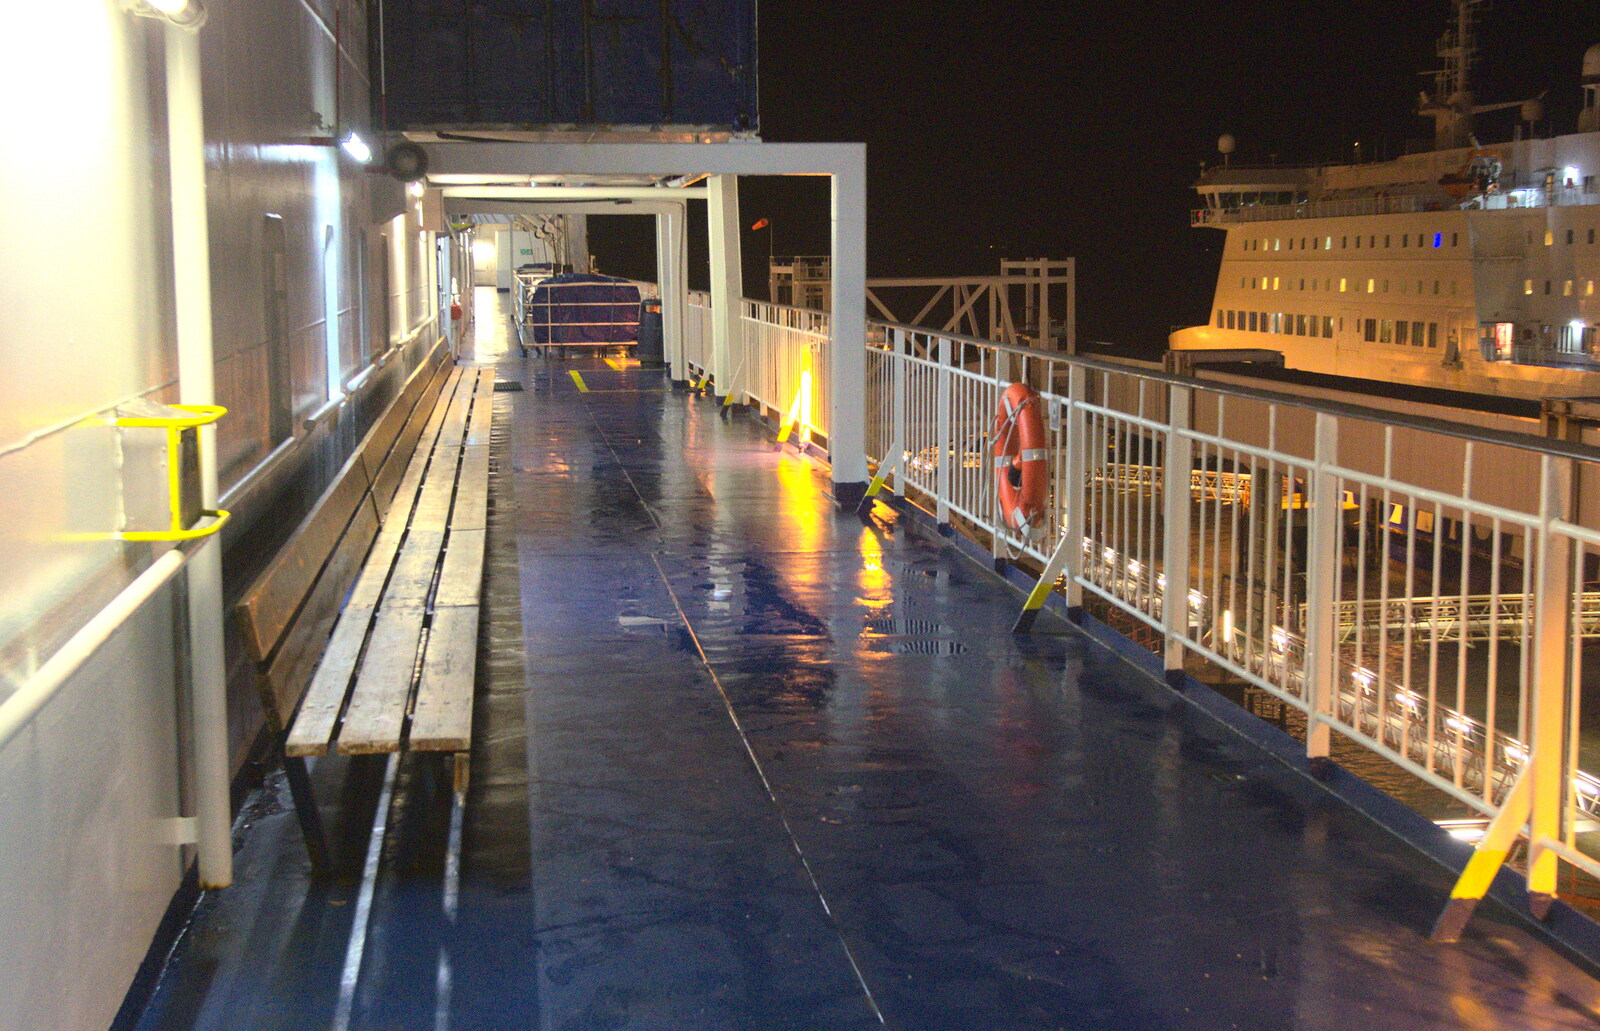 The empty decks of our ferry from Conwy, Holyhead and the Ferry to Ireland - 21st December 2015